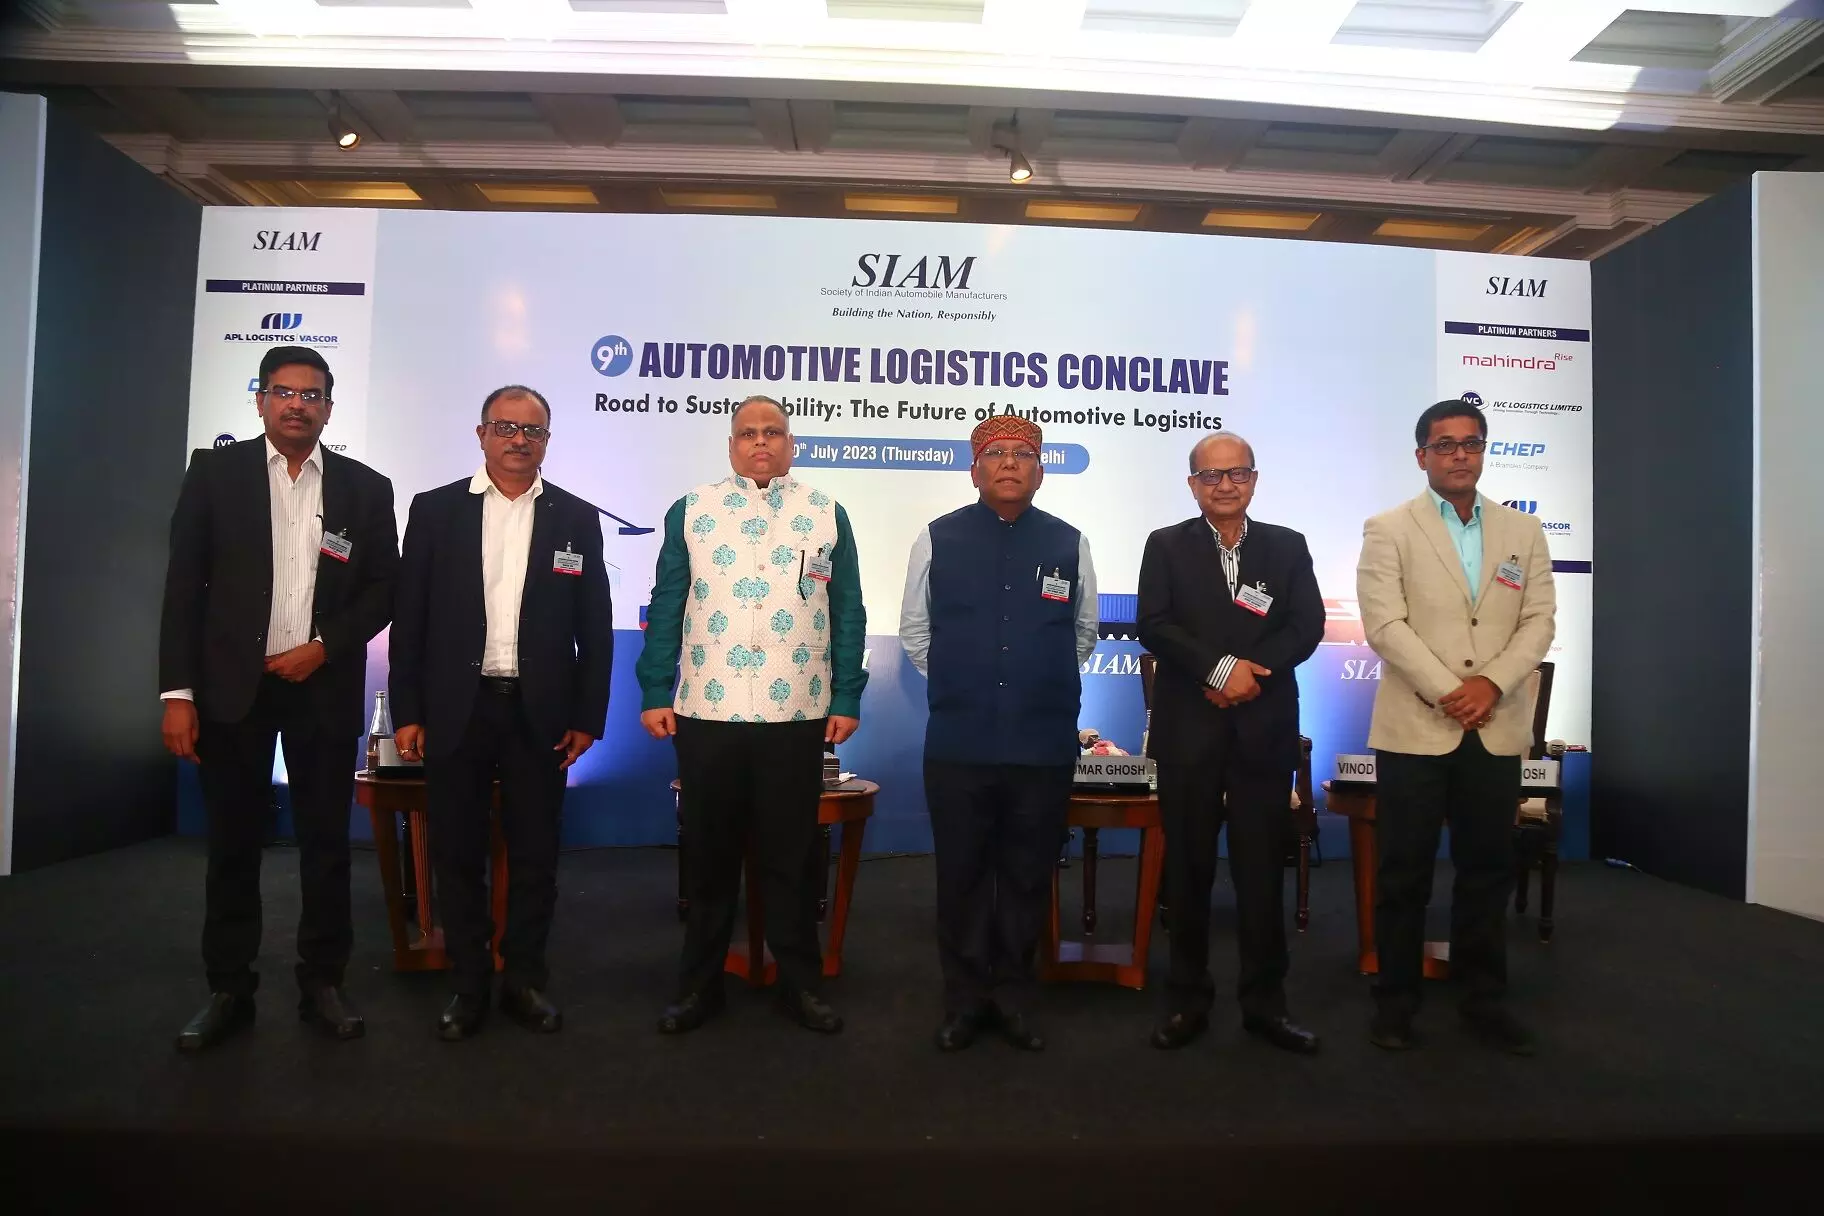 SIAM organises the 9th Automotive Logistic Conclave